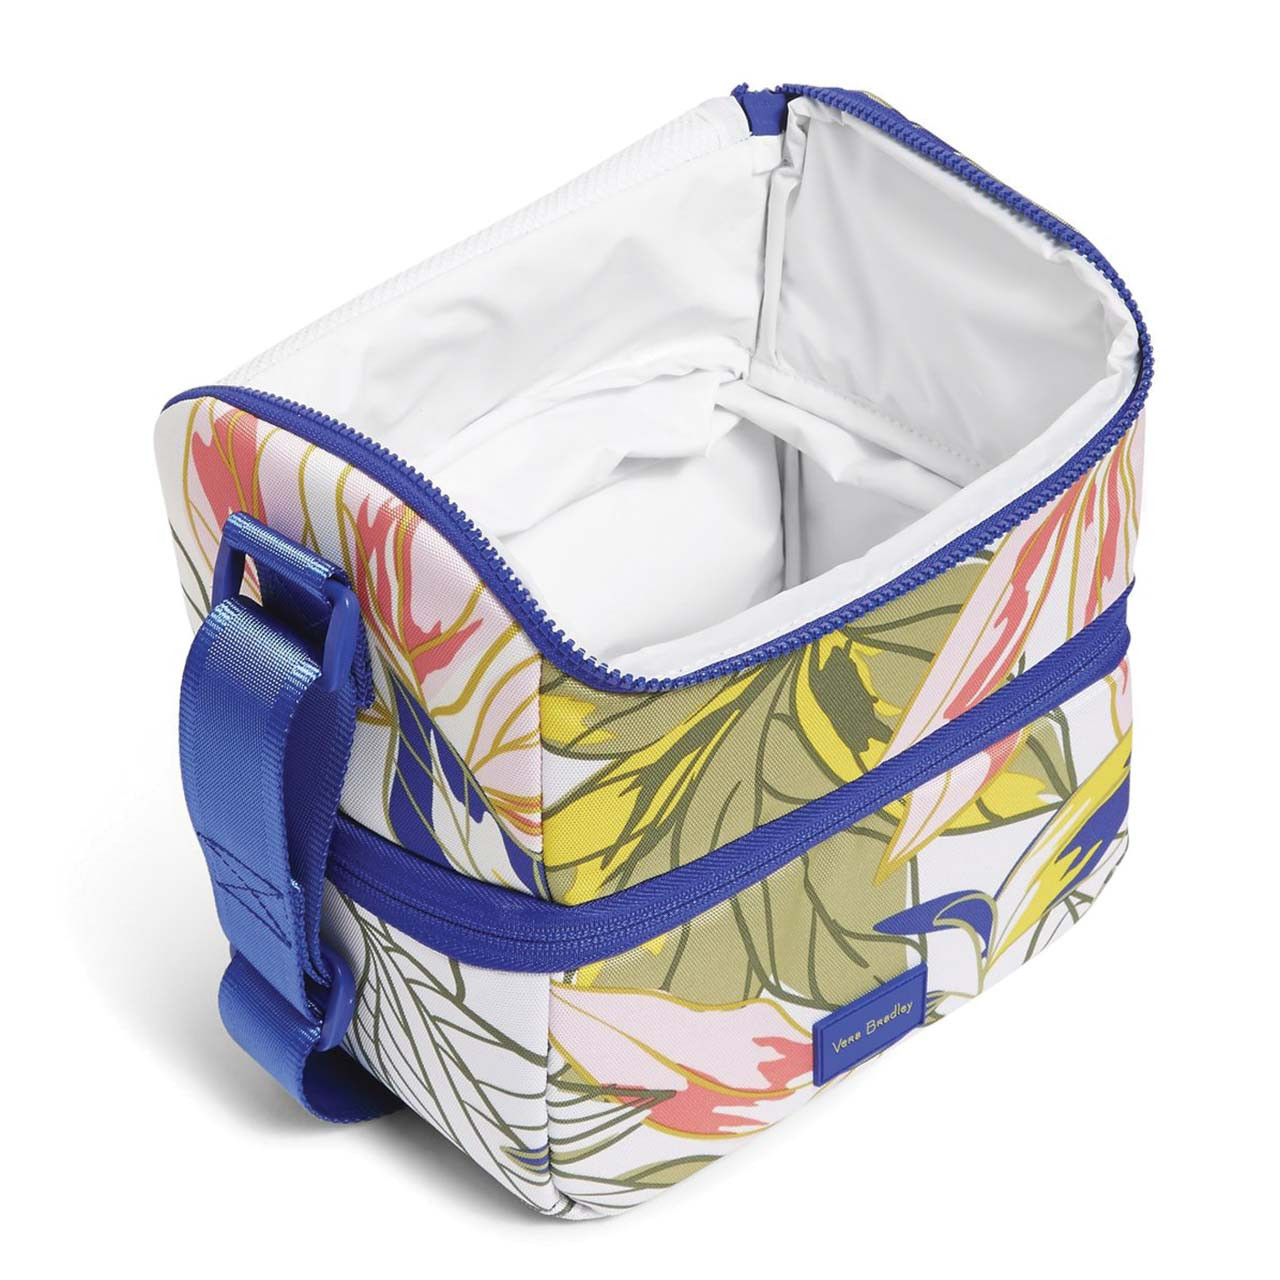 https://cdn11.bigcommerce.com/s-6zwhmb4rdr/images/stencil/1280x1280/products/65060/182725/the-lamp-stand-vera-bradley-reactive-expandable-lunch-cooler-rainforest-leaves-26687-u38-4__10814.1628091901.jpg?c=1